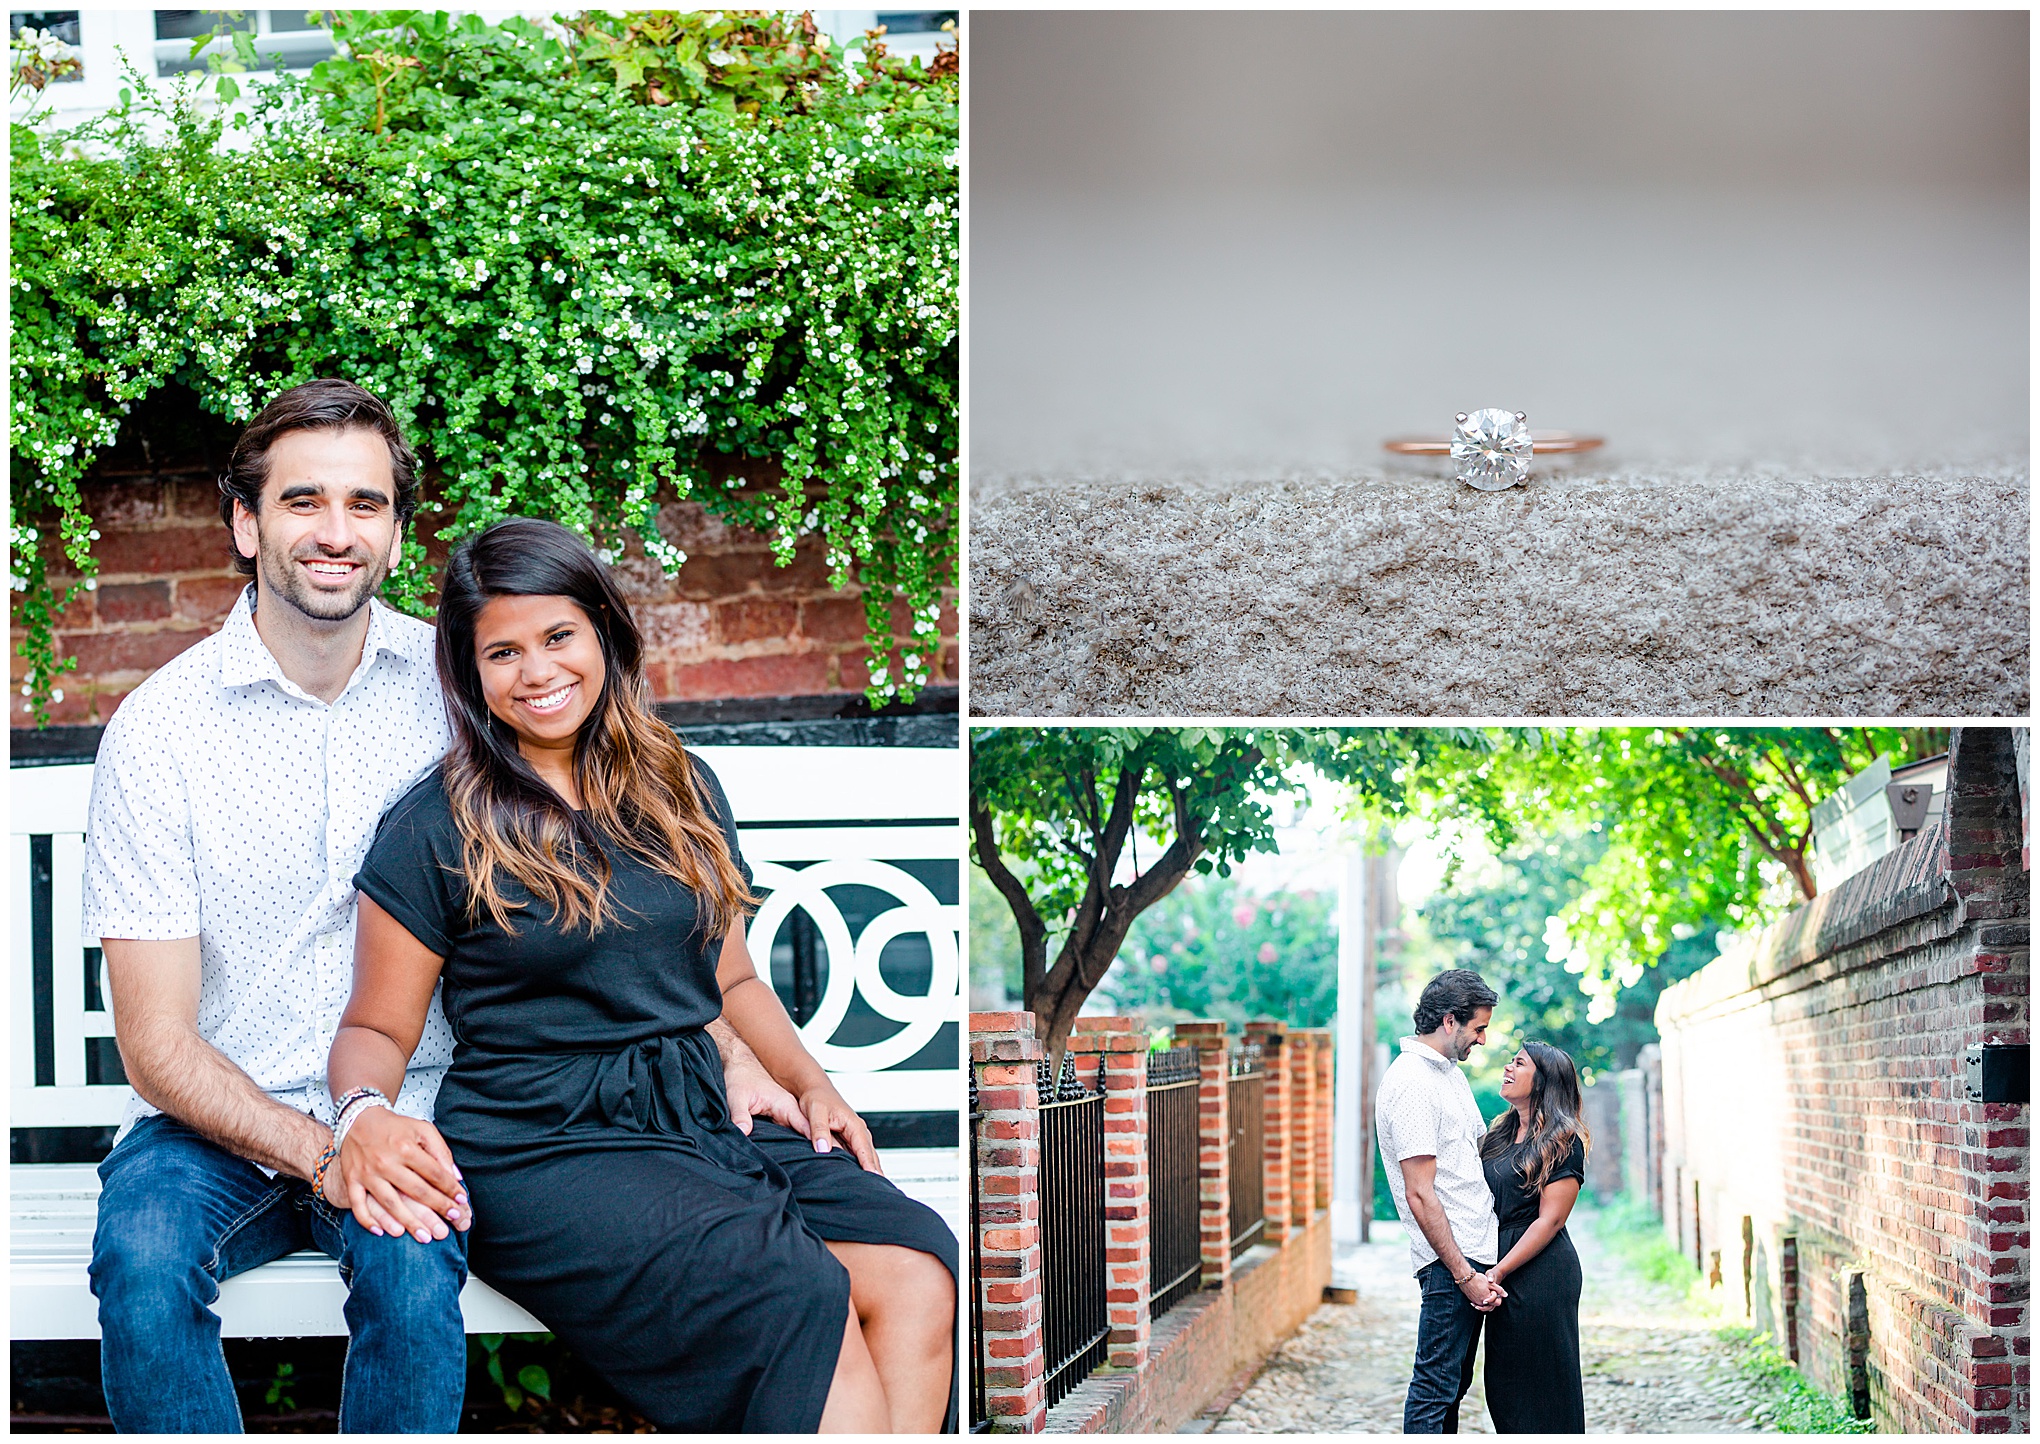 Old Town Alexandria engagement photos, Alexandria engagement photos, Old Town Alexandria photos, Old Town Alexandria, Alexandria engagement photos, Alexandria Virginia, classic engagement photos, historic town engagement photos, engagement photos, Rachel E.H. Photography, Lee Street alley, round solitaire engagement ring